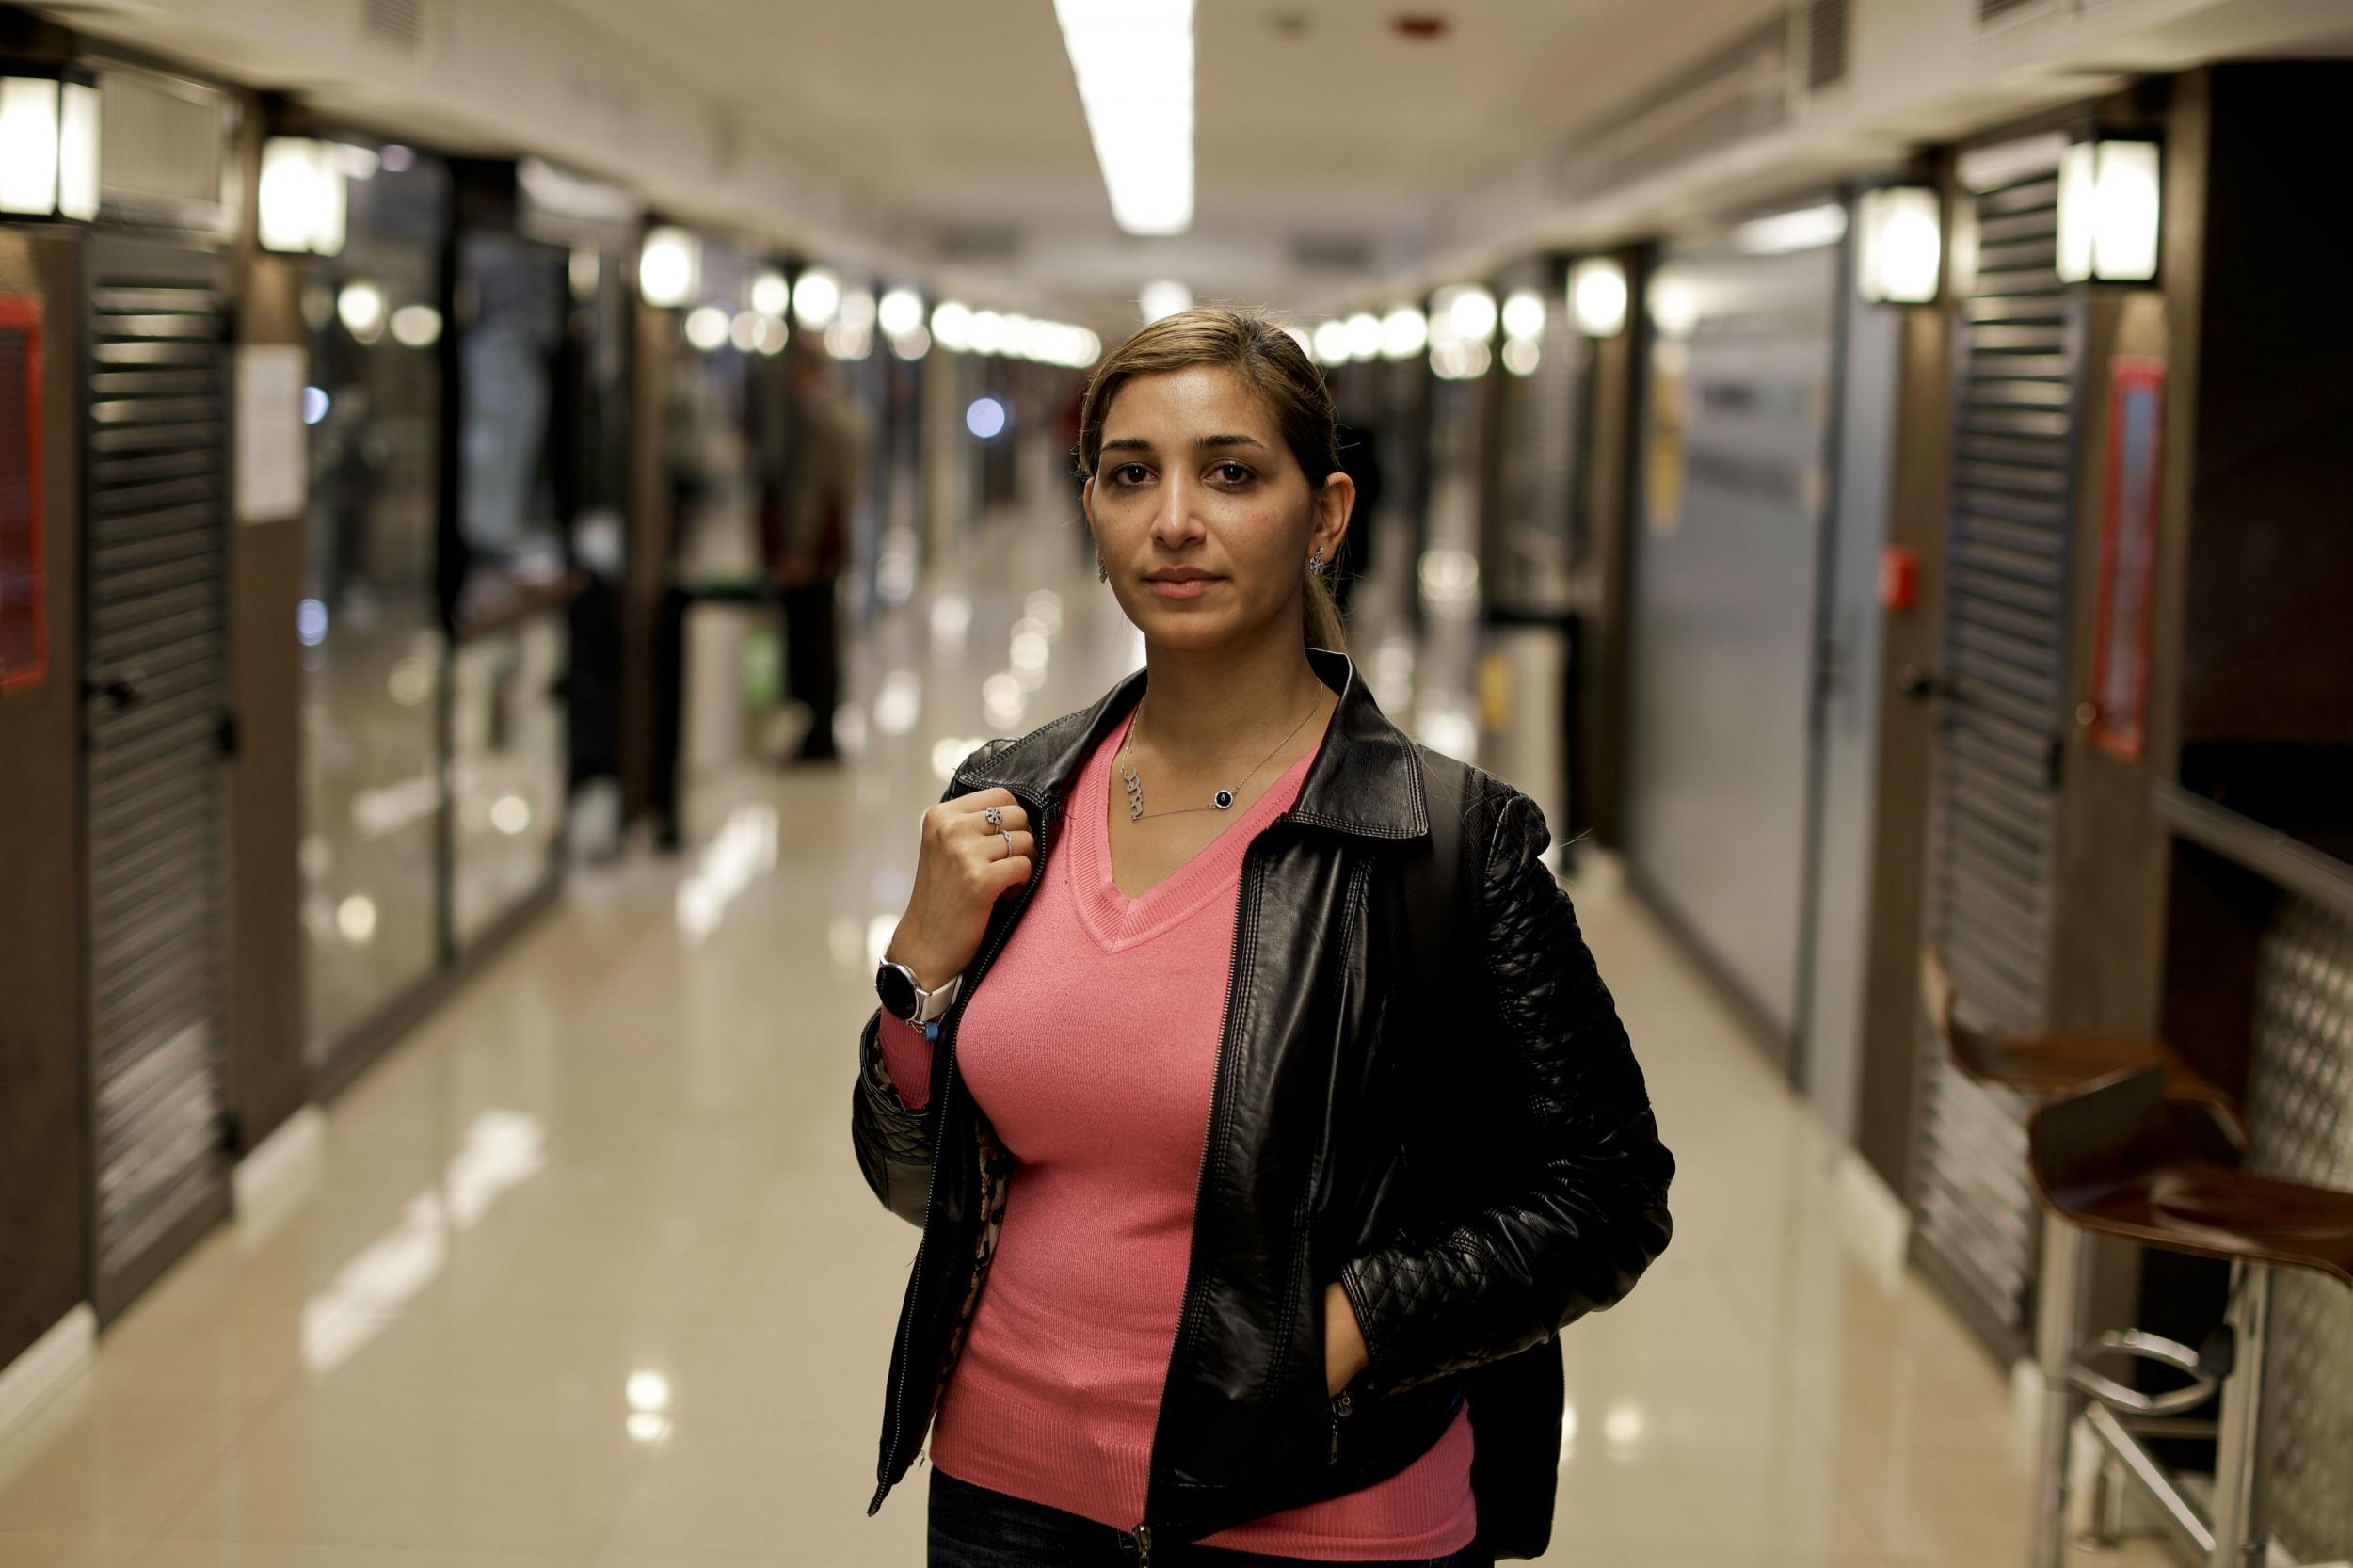 Nairouz Baloul went to Argentina from Syria and hopes her family members can join her